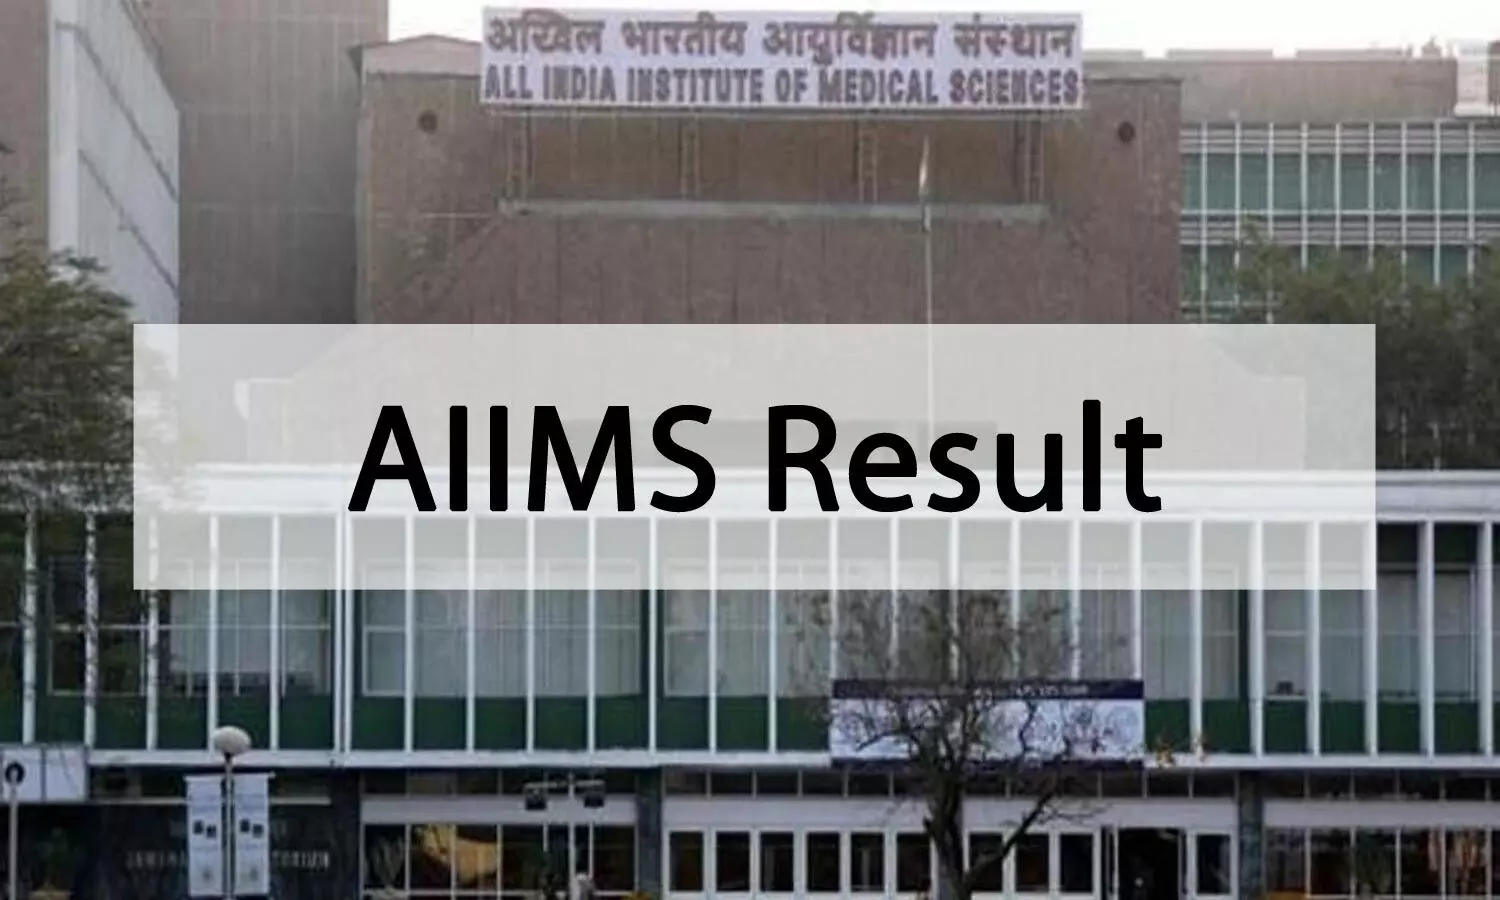 AIIMS releases results for DM Infectious Diseases Professional exams 2020